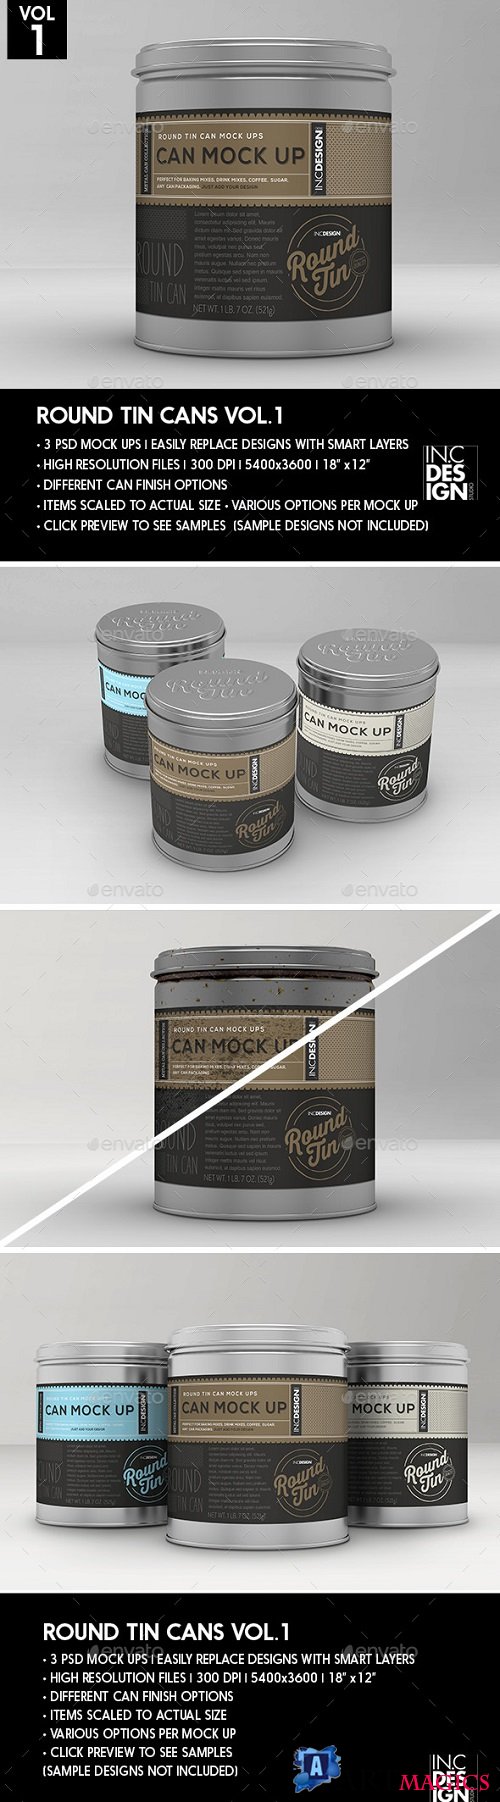 Round Tin Cans Vol.1 Packaging Mock Ups 18173598